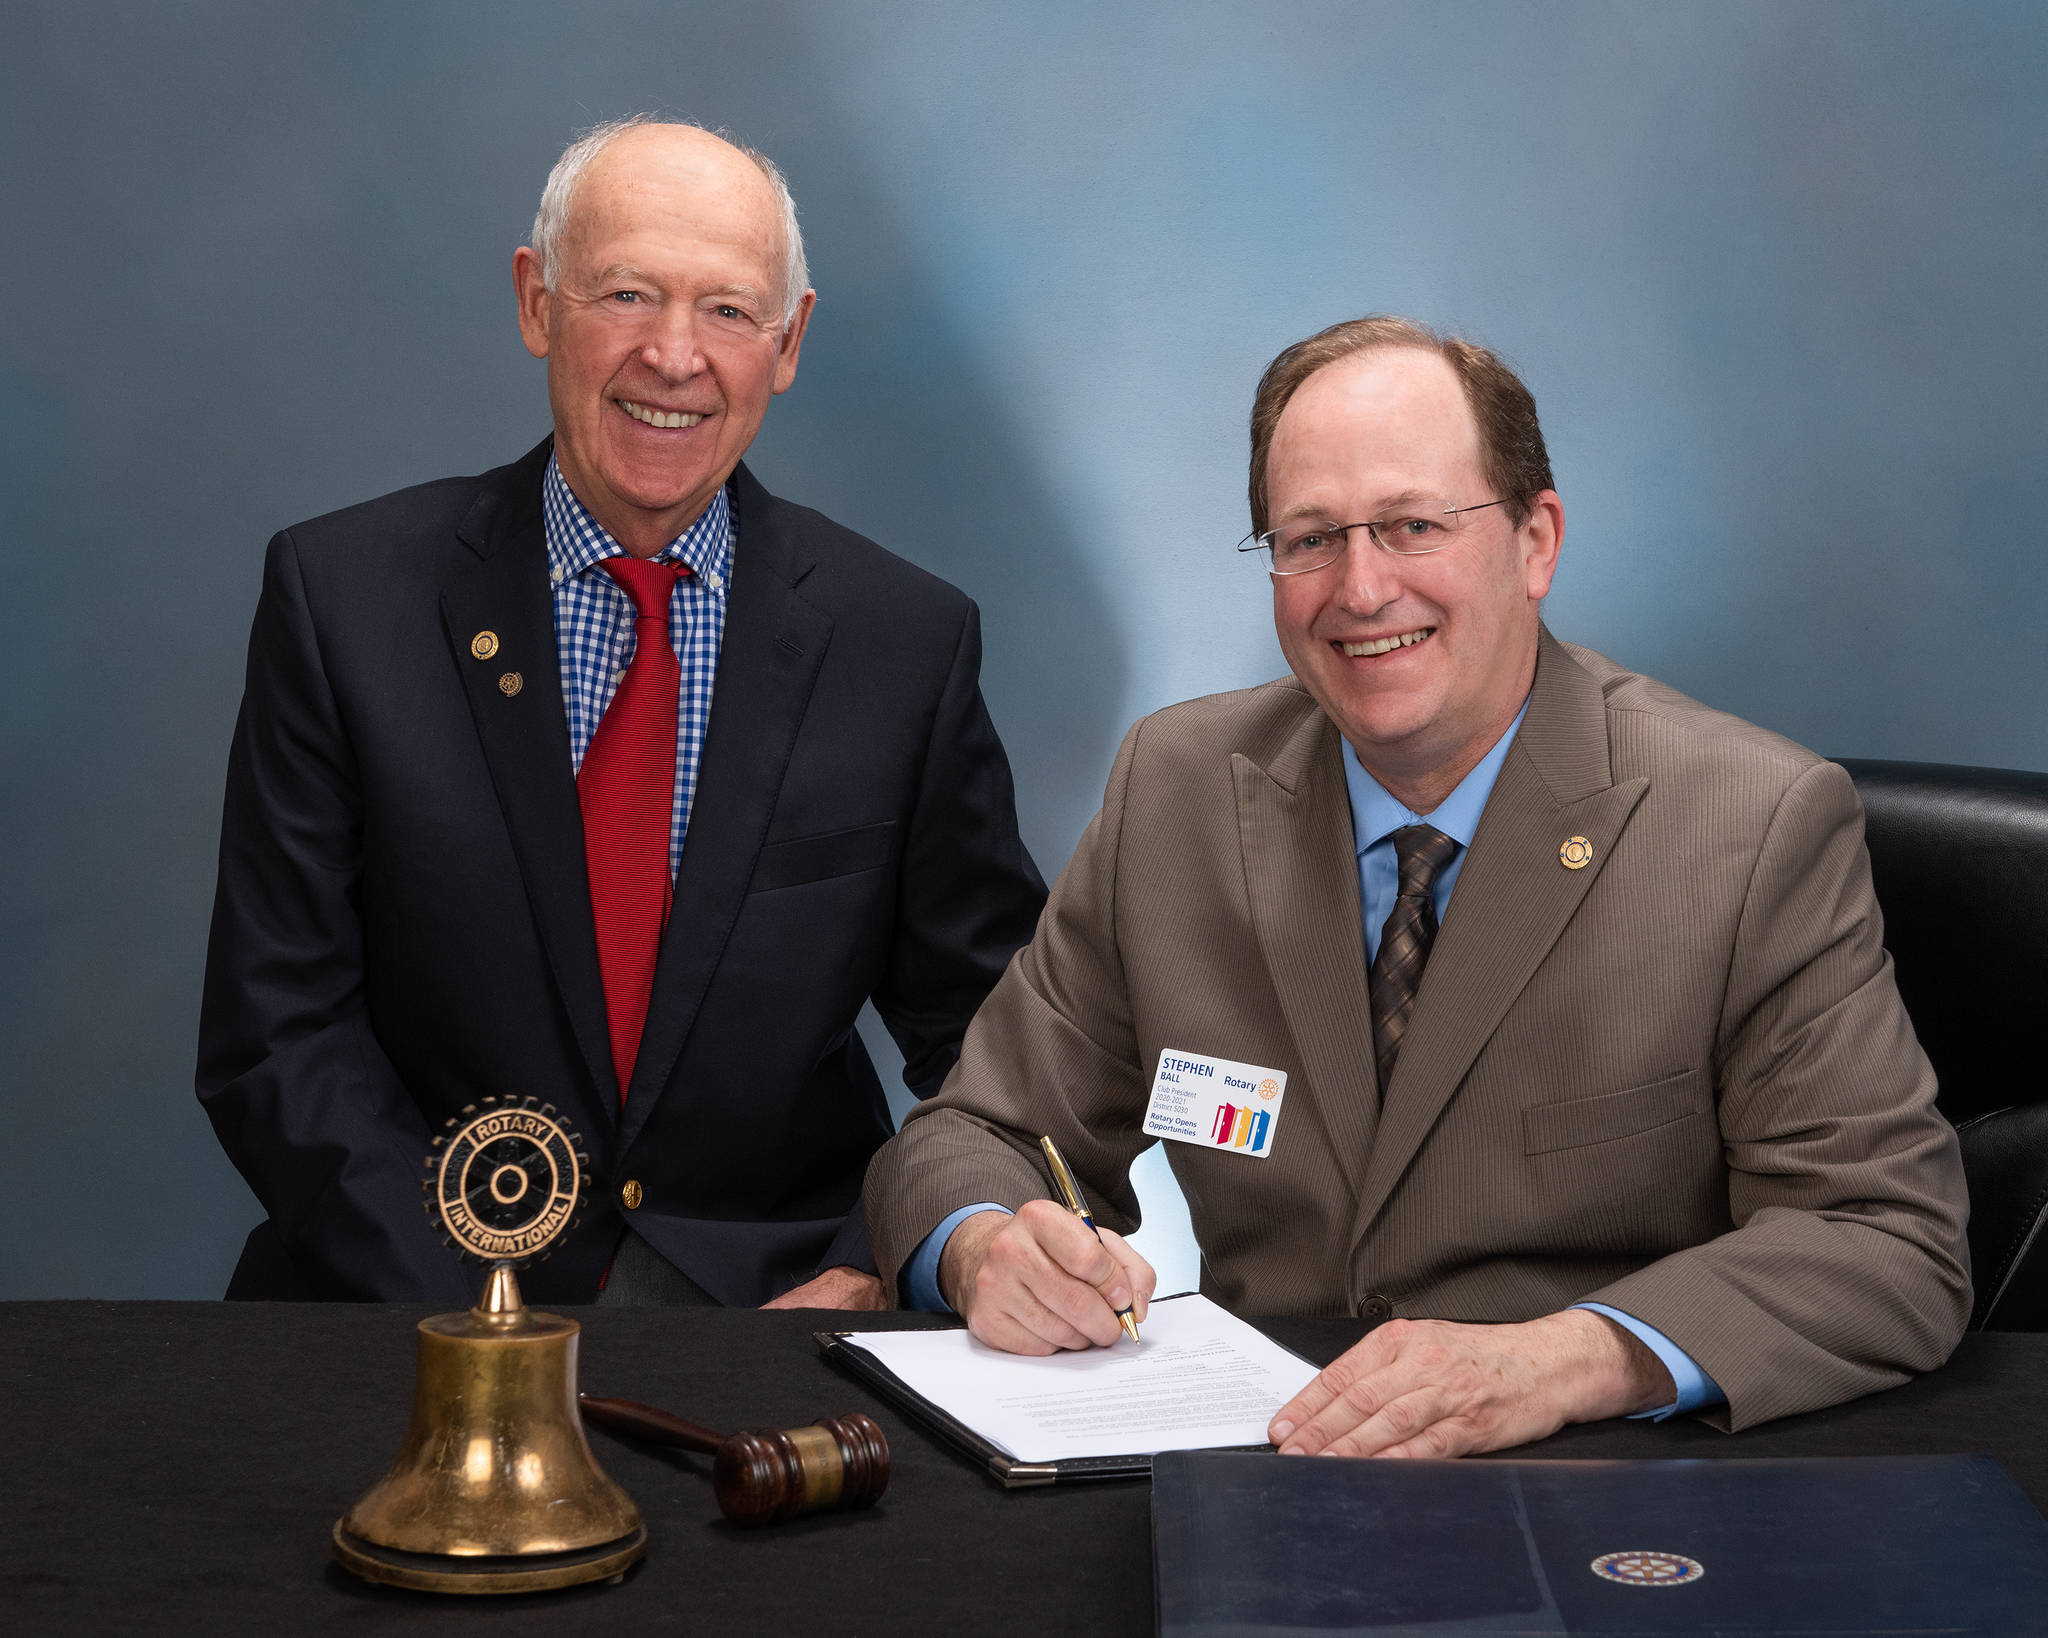 Rotary Club of Federal Way President Steve Ball, right, signs the Program of Scale agreement with the Rotary Foundation with Federal Way Rotary Club member Bill Feldt. Courtesy photo